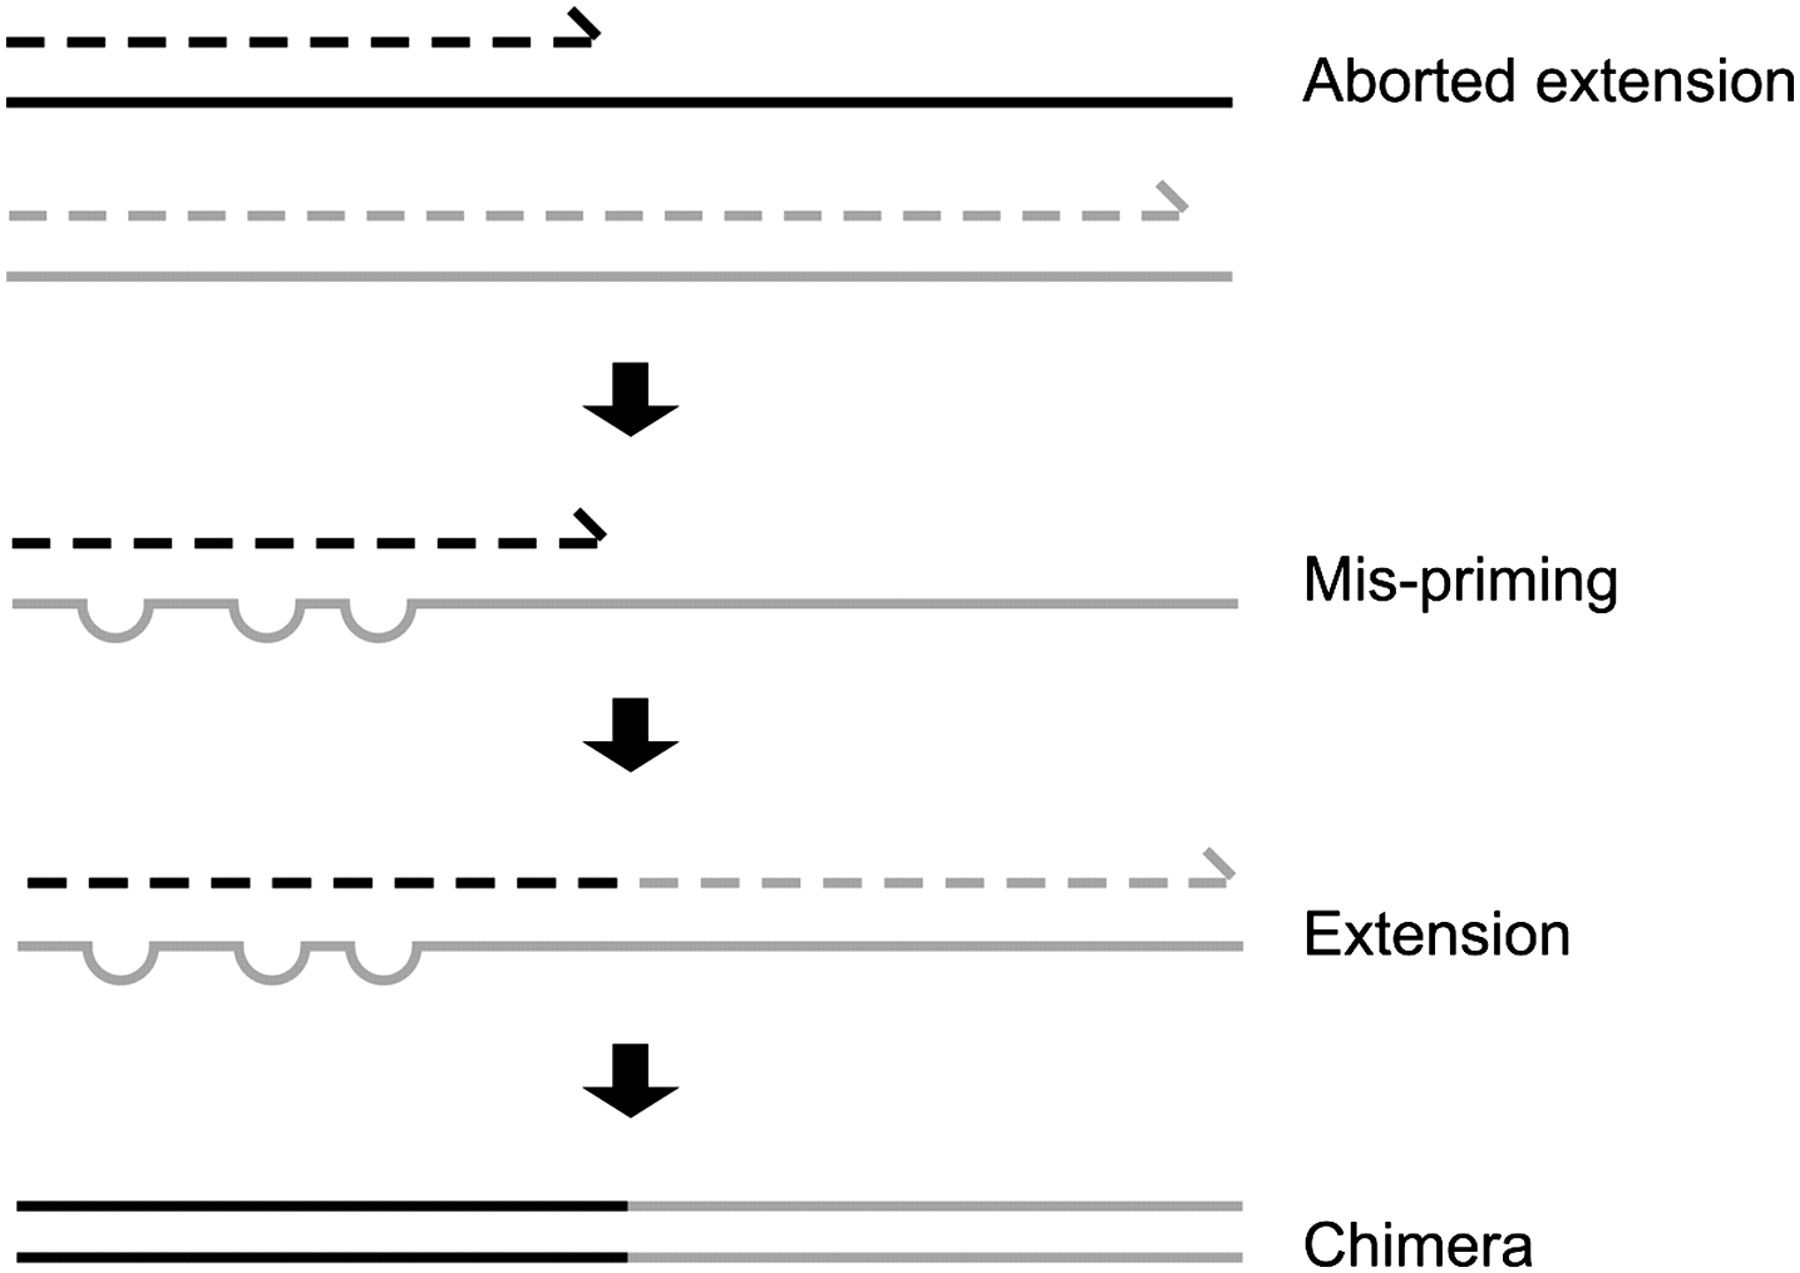 aborted extension leads to mispriming, which gets extended with the wrong sequence, and results in a chimera